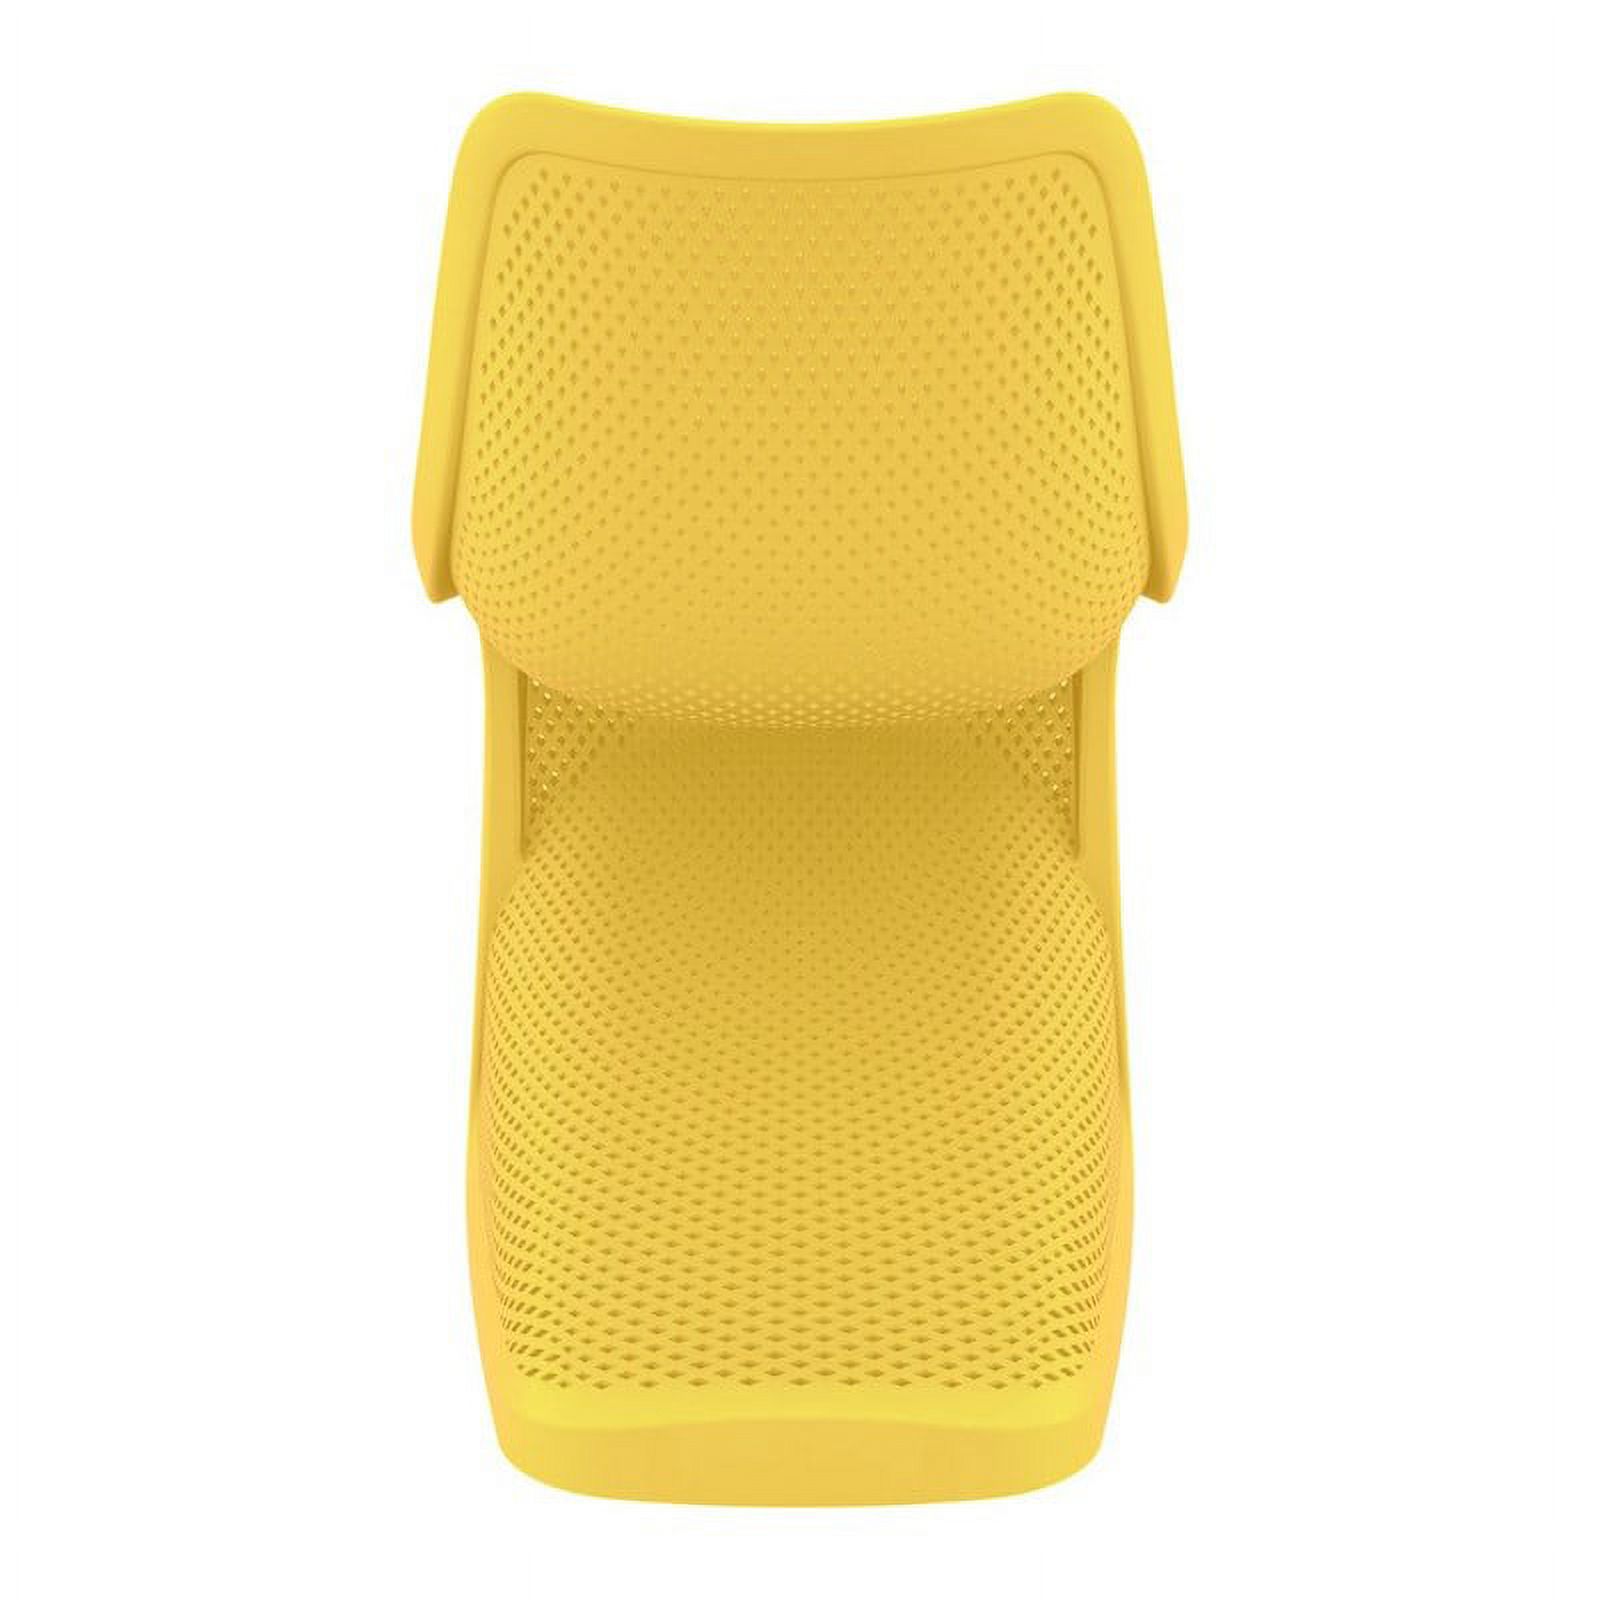 Siesta  Bloom Dining Chair Yellow - image 5 of 12